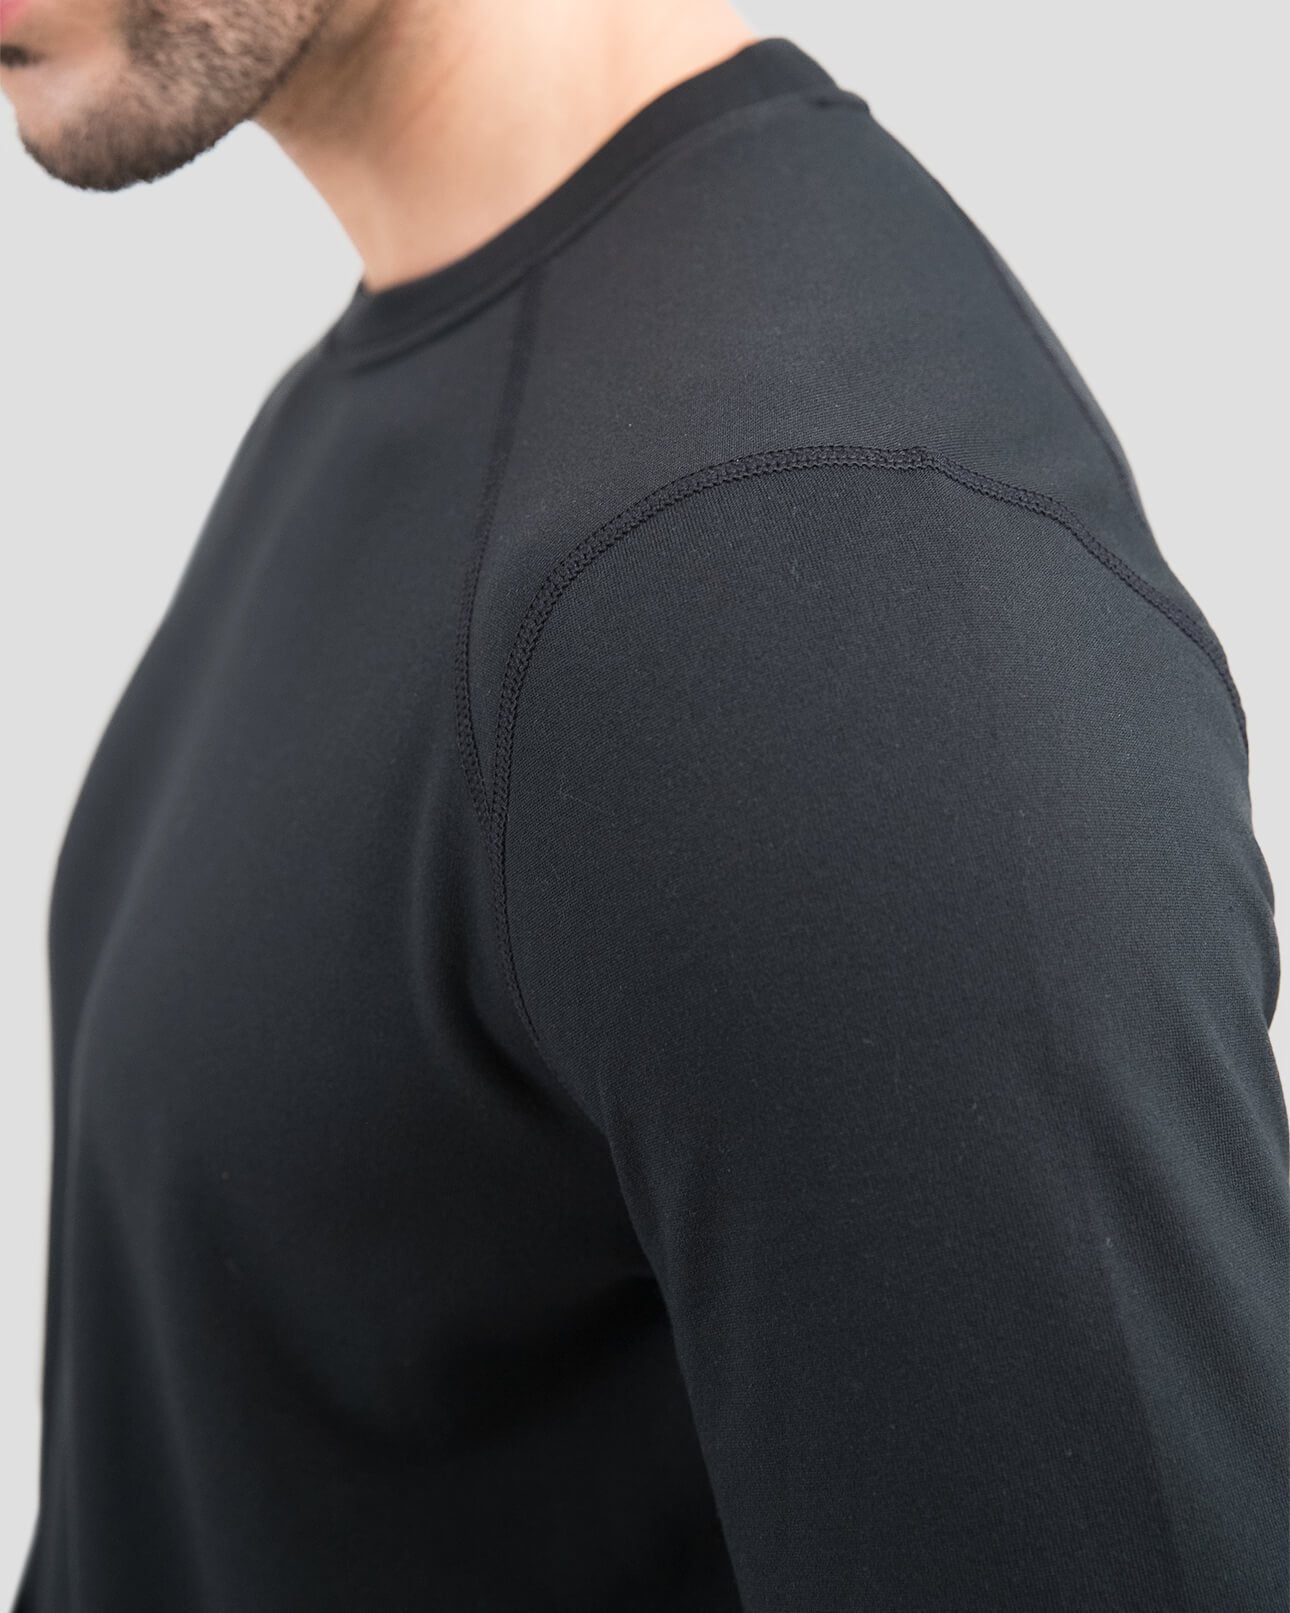 Big & Tall Men's Military Heritage Expedition Weight Fleece Thermal Crew Shirt | Color: Black